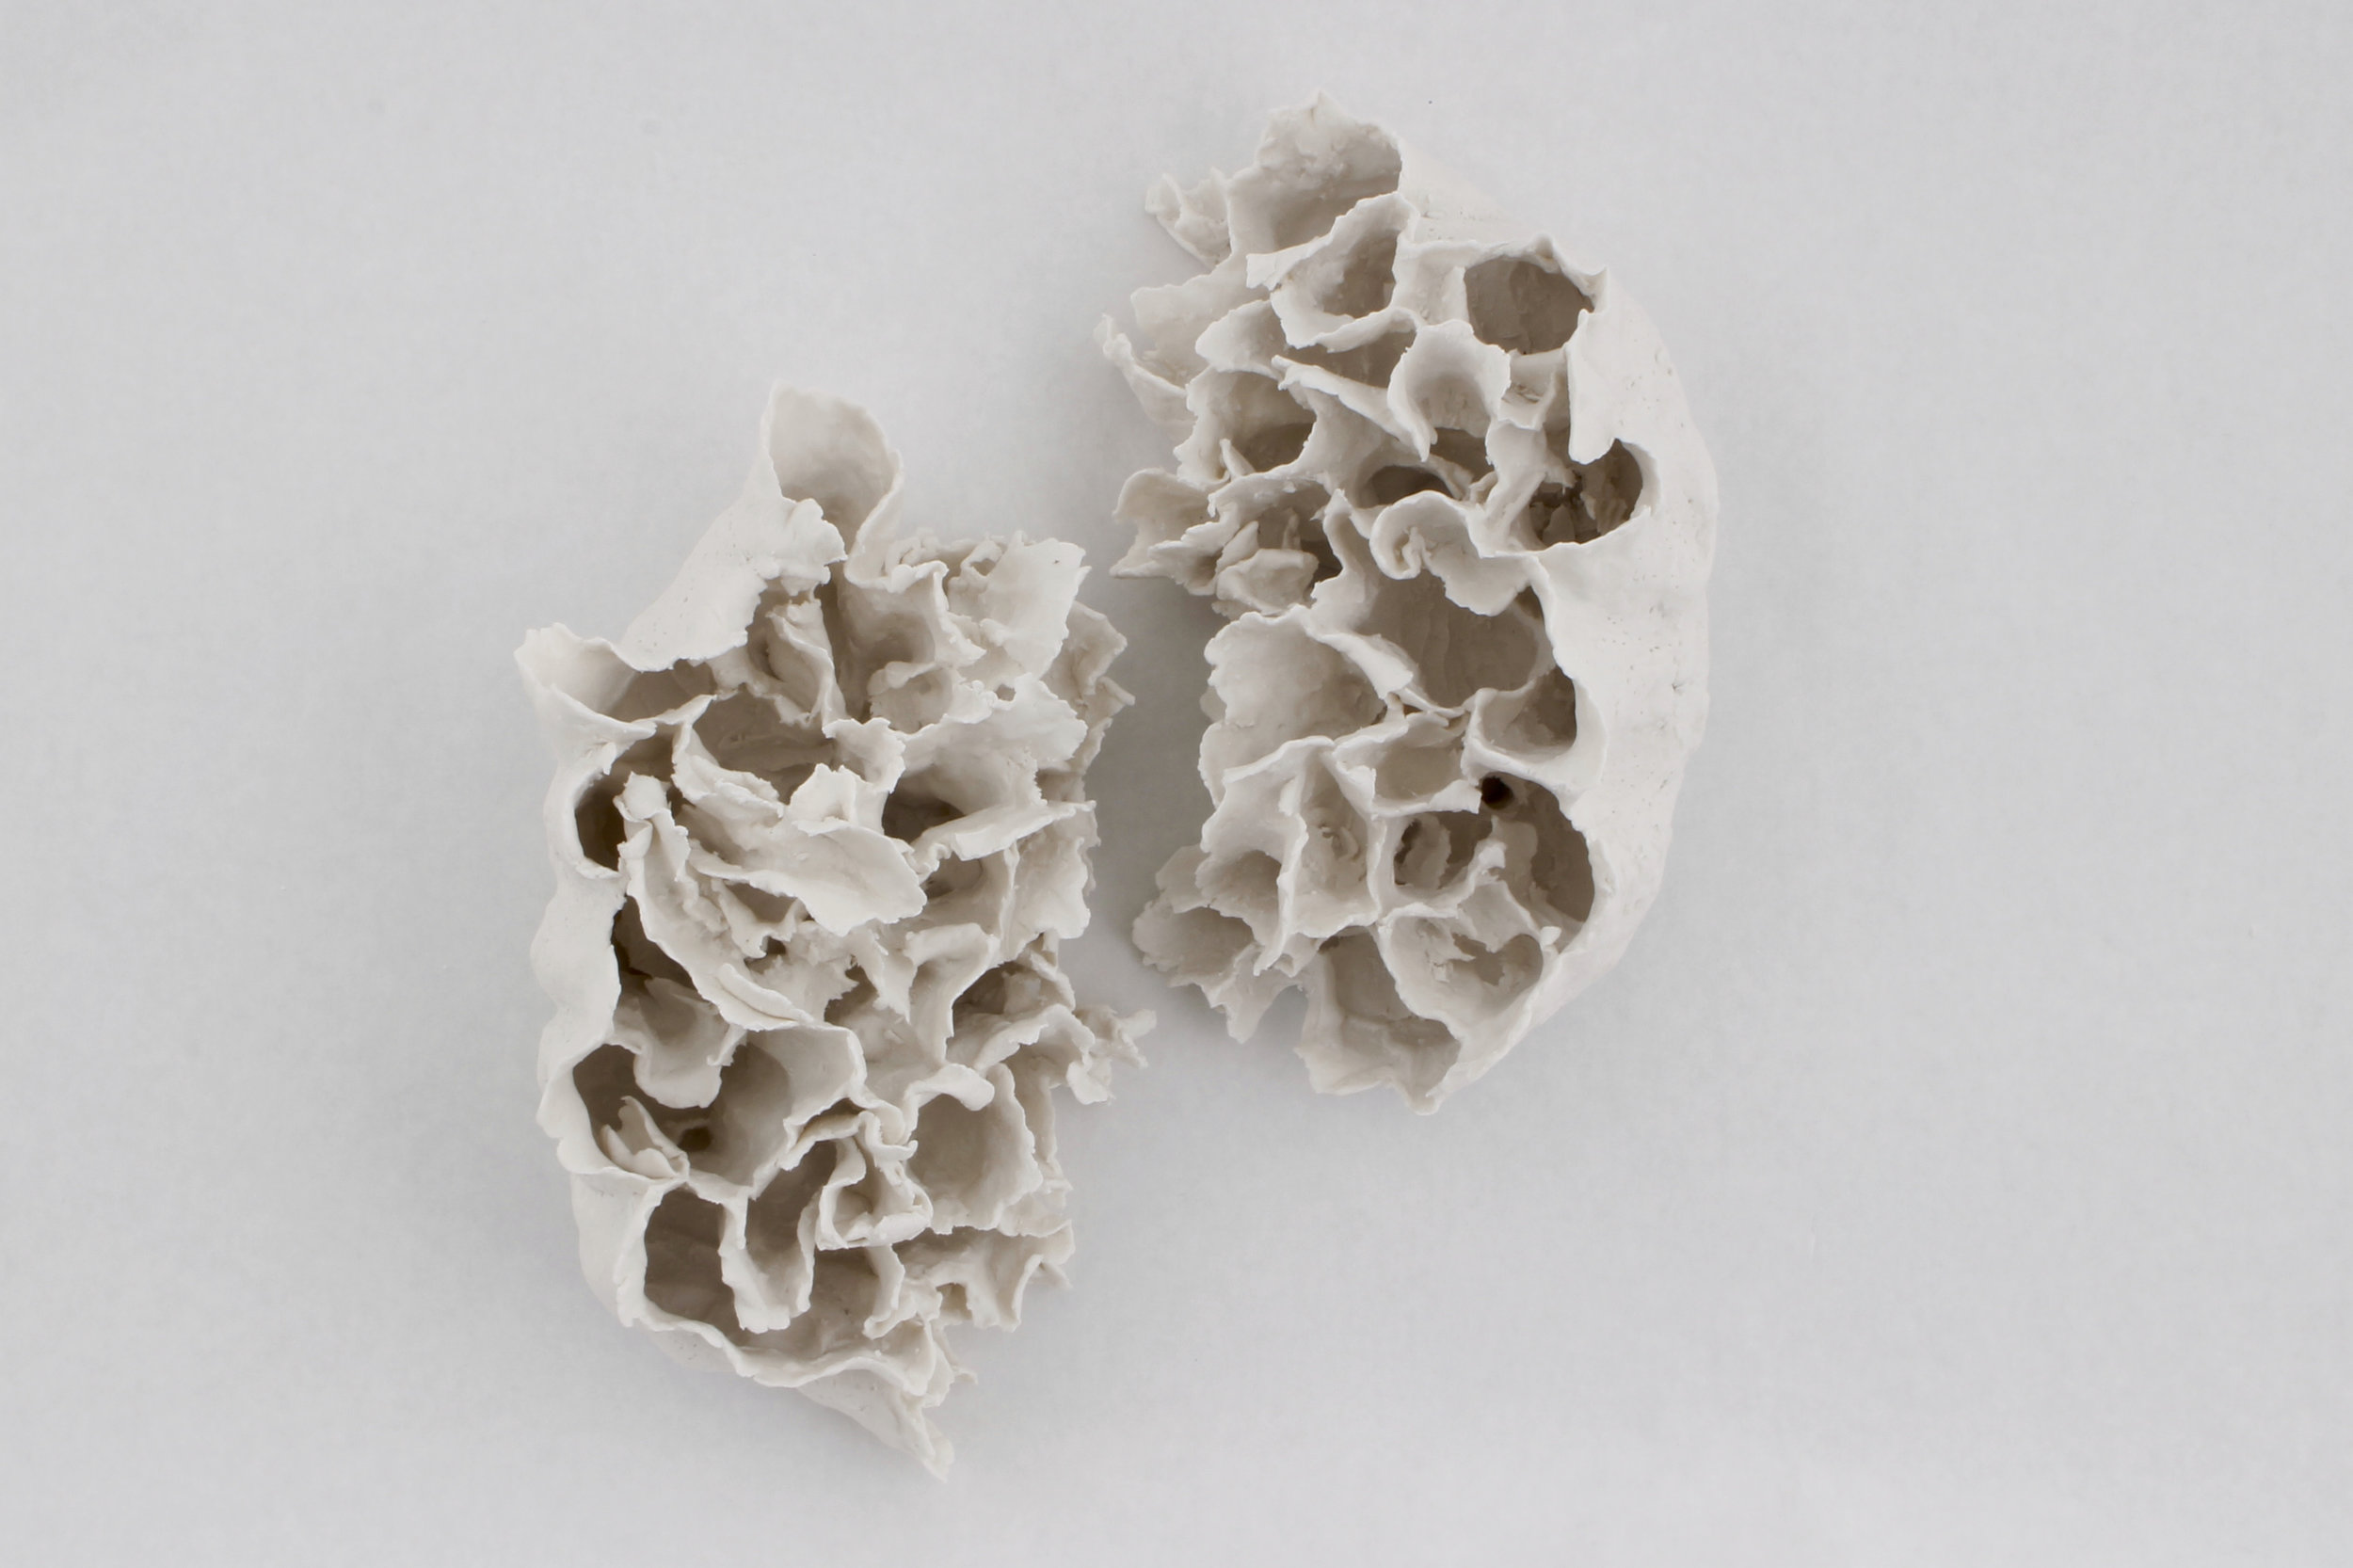  Renqian Yang , Clustered Light , 2018. Paper clay, fire to cone 6, electric kiln, 11 x 7 x 5 inches each ©Renqian Yang, courtesy Fou Gallery.  